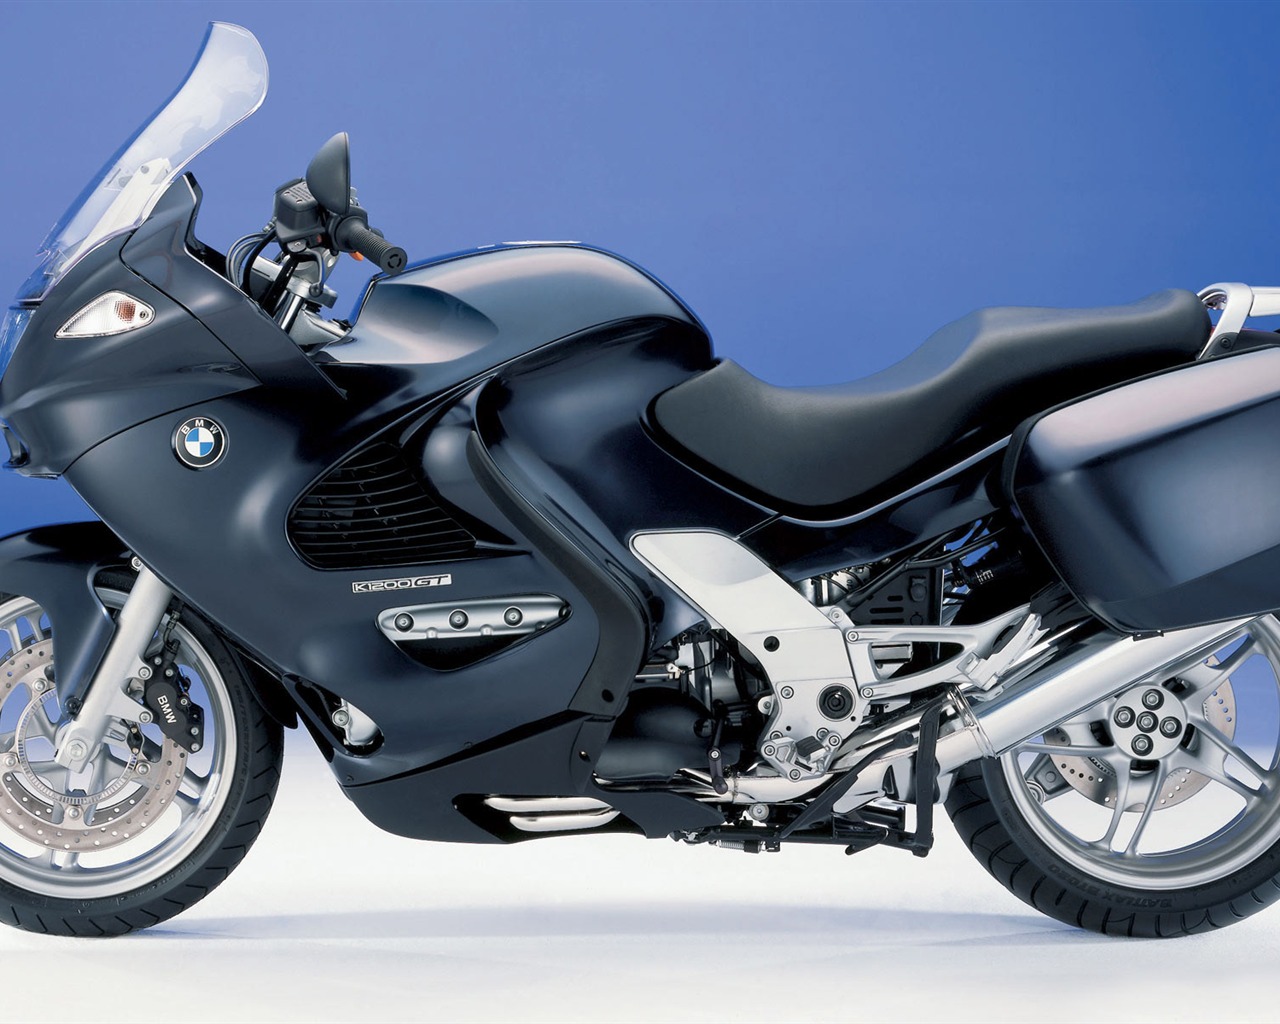 BMW motorcycle wallpapers (1) #20 - 1280x1024